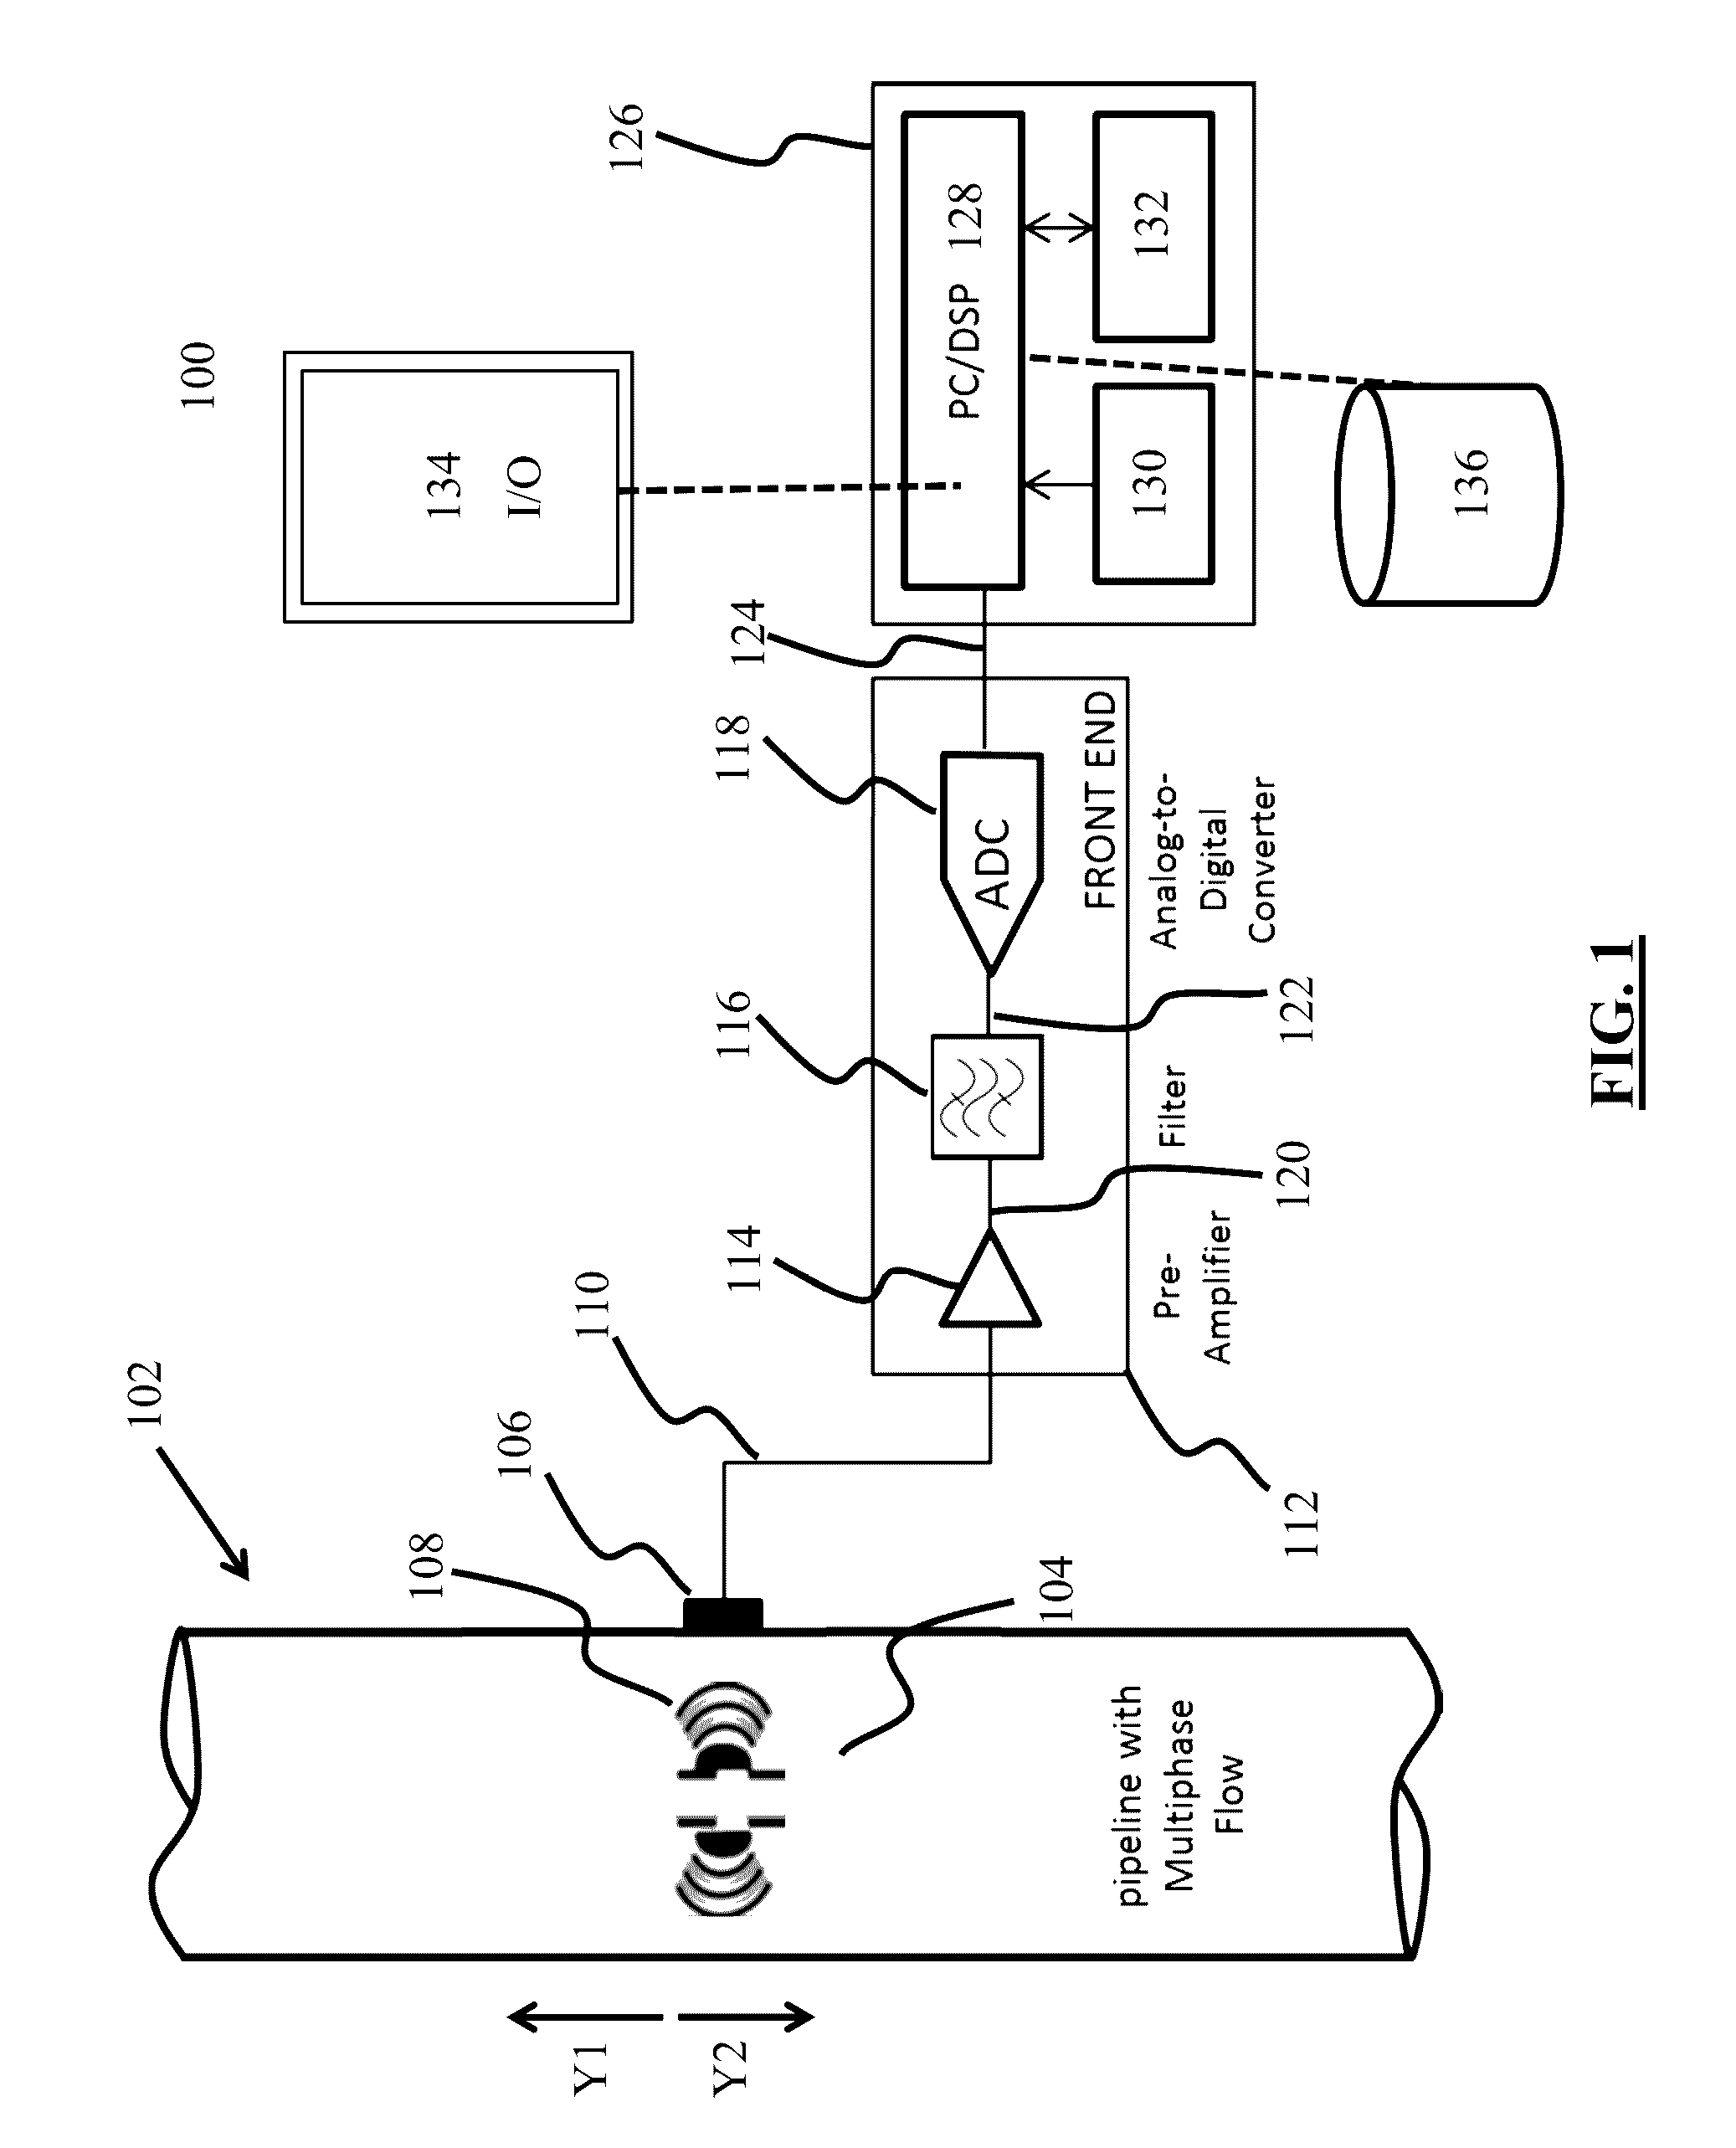 Systems, methods, and computer medium to provide entropy based characterization of multiphase flow